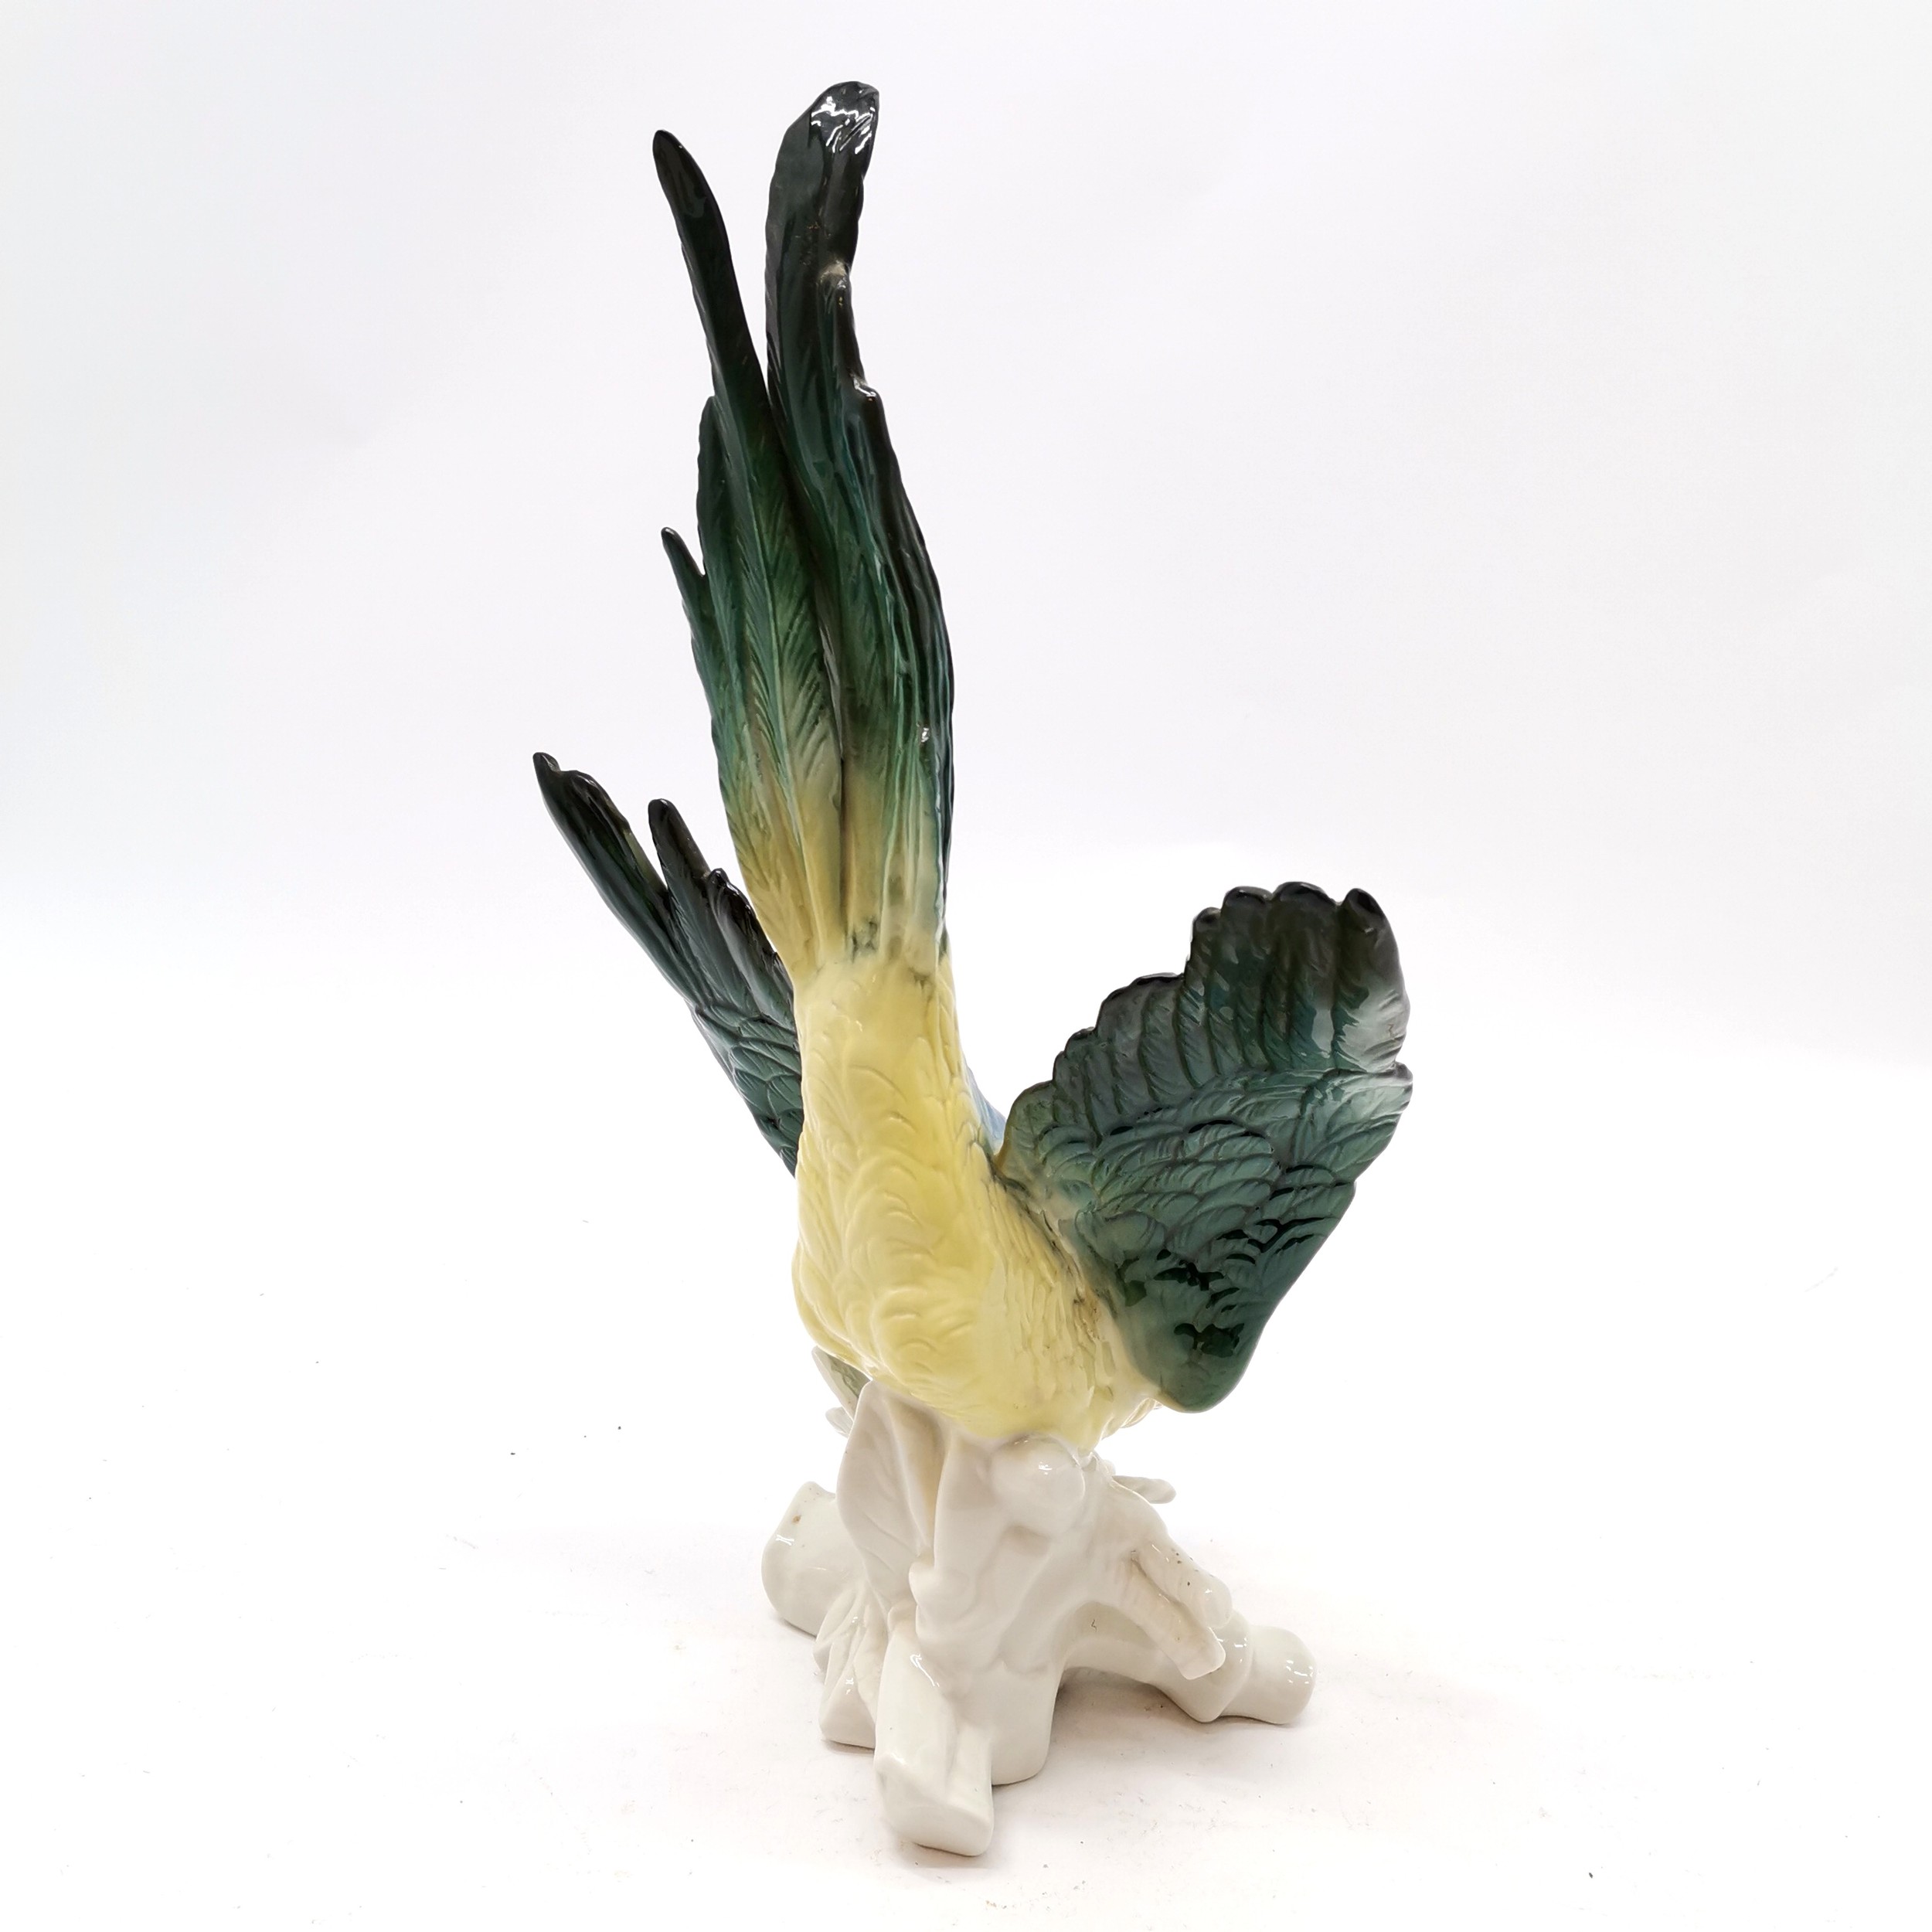 German porcelain Karl Ens figure of a parrot on naturalistic base, in good condition, 37 cm high x - Image 2 of 4